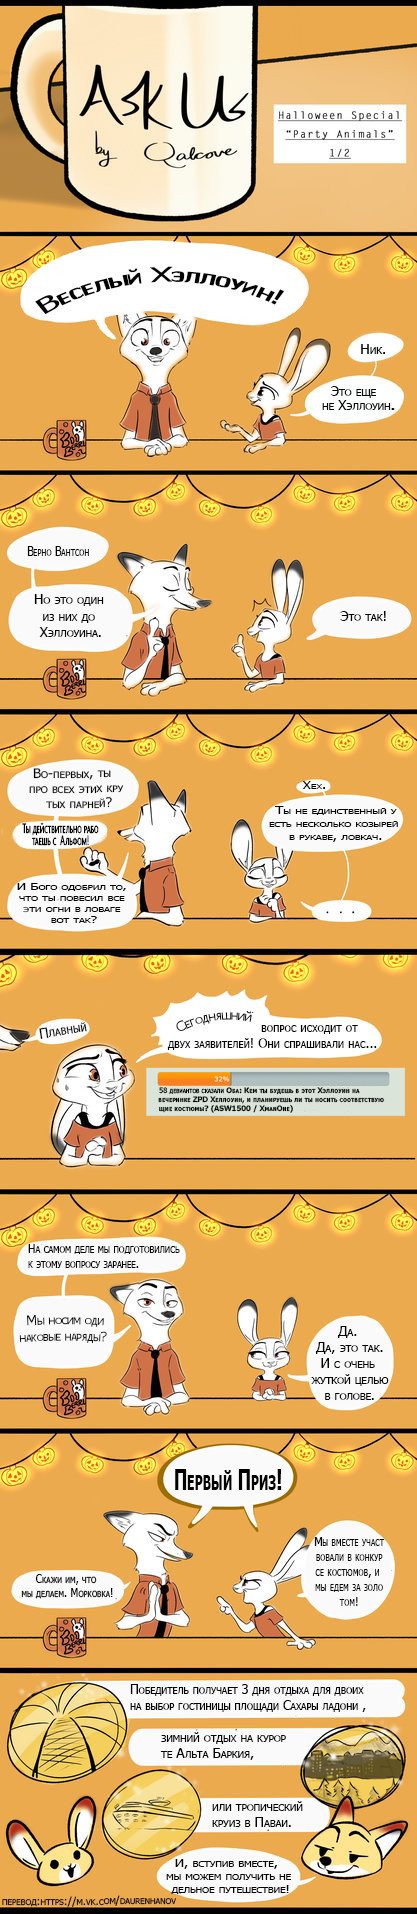 Halloween Special "Party Animals" Ask us part 1 , , Nick Wilde, Judy Hopps, Qalcove, 